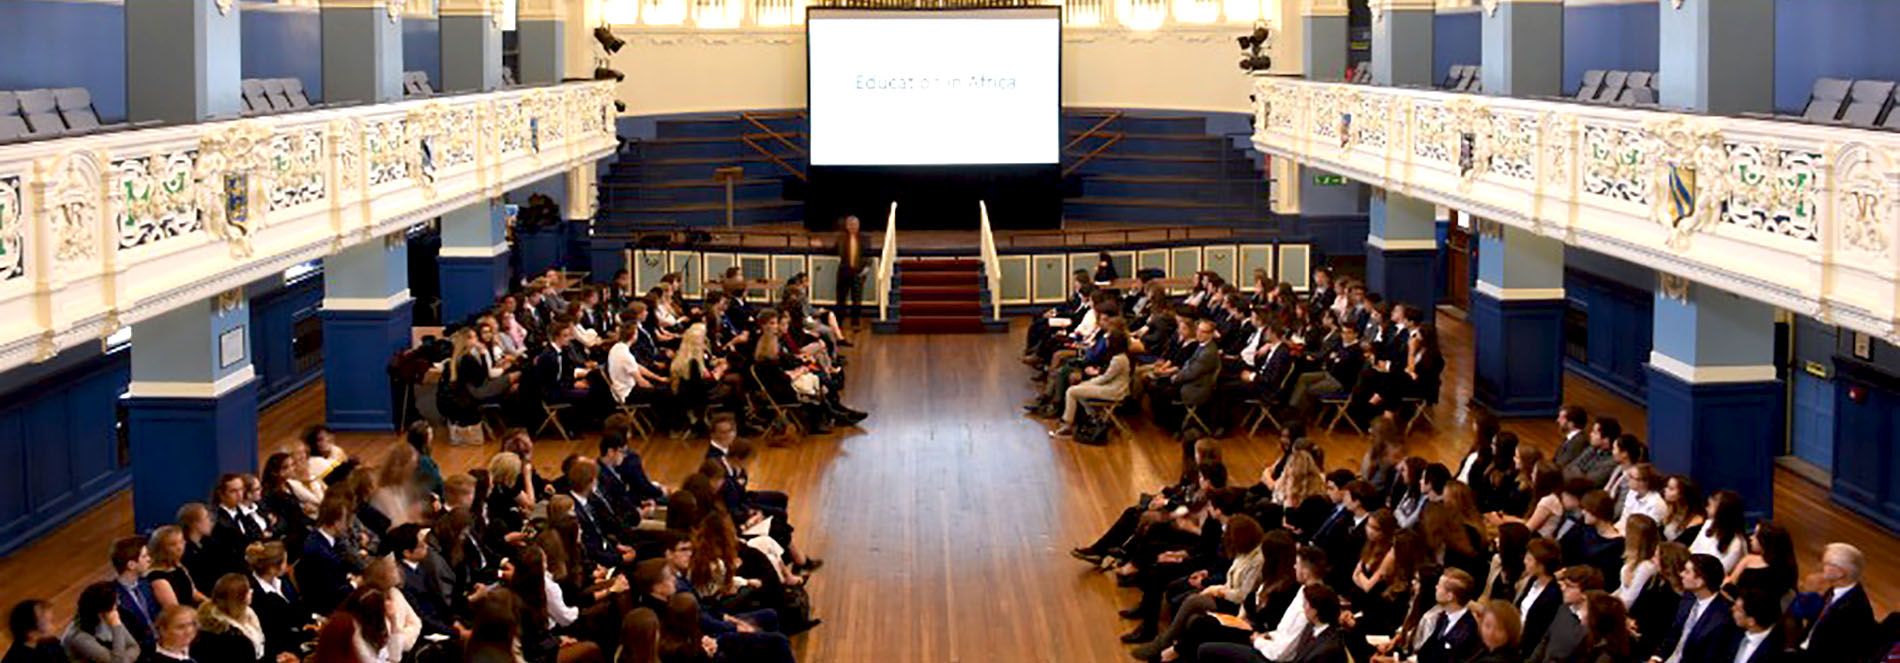 St Clare's Model United Nations conference